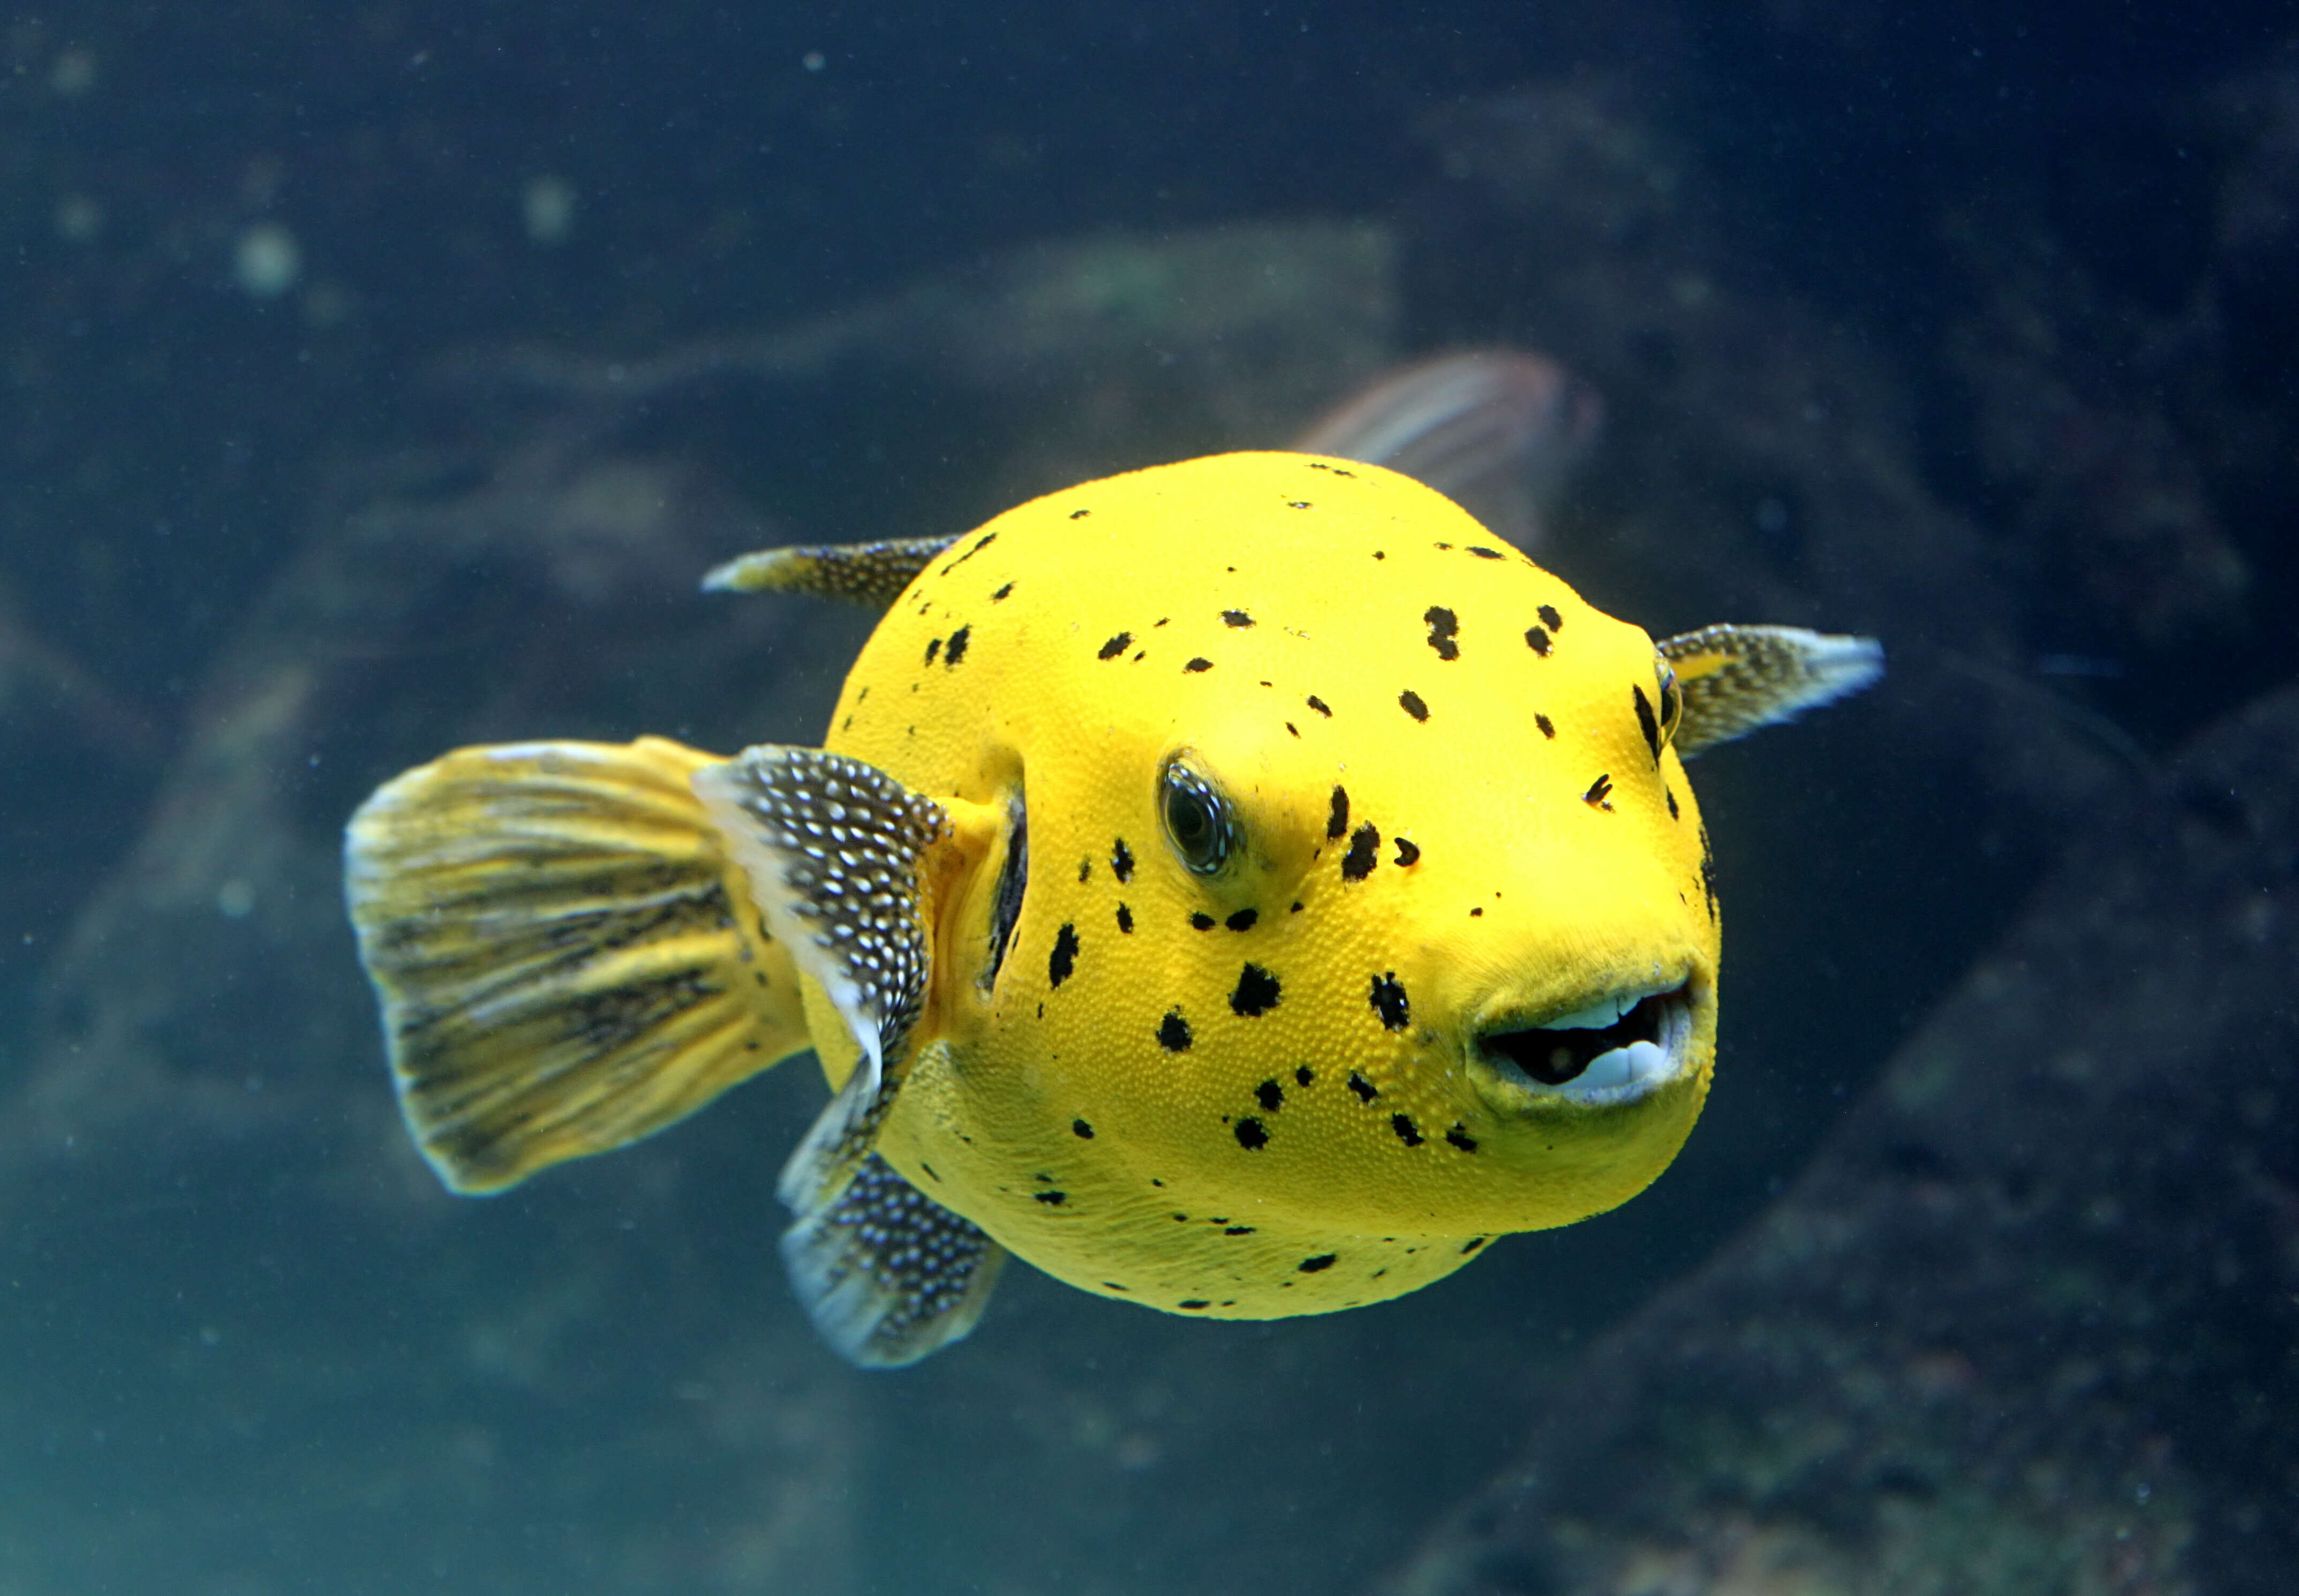 Image of Black Spotted Blow Fish